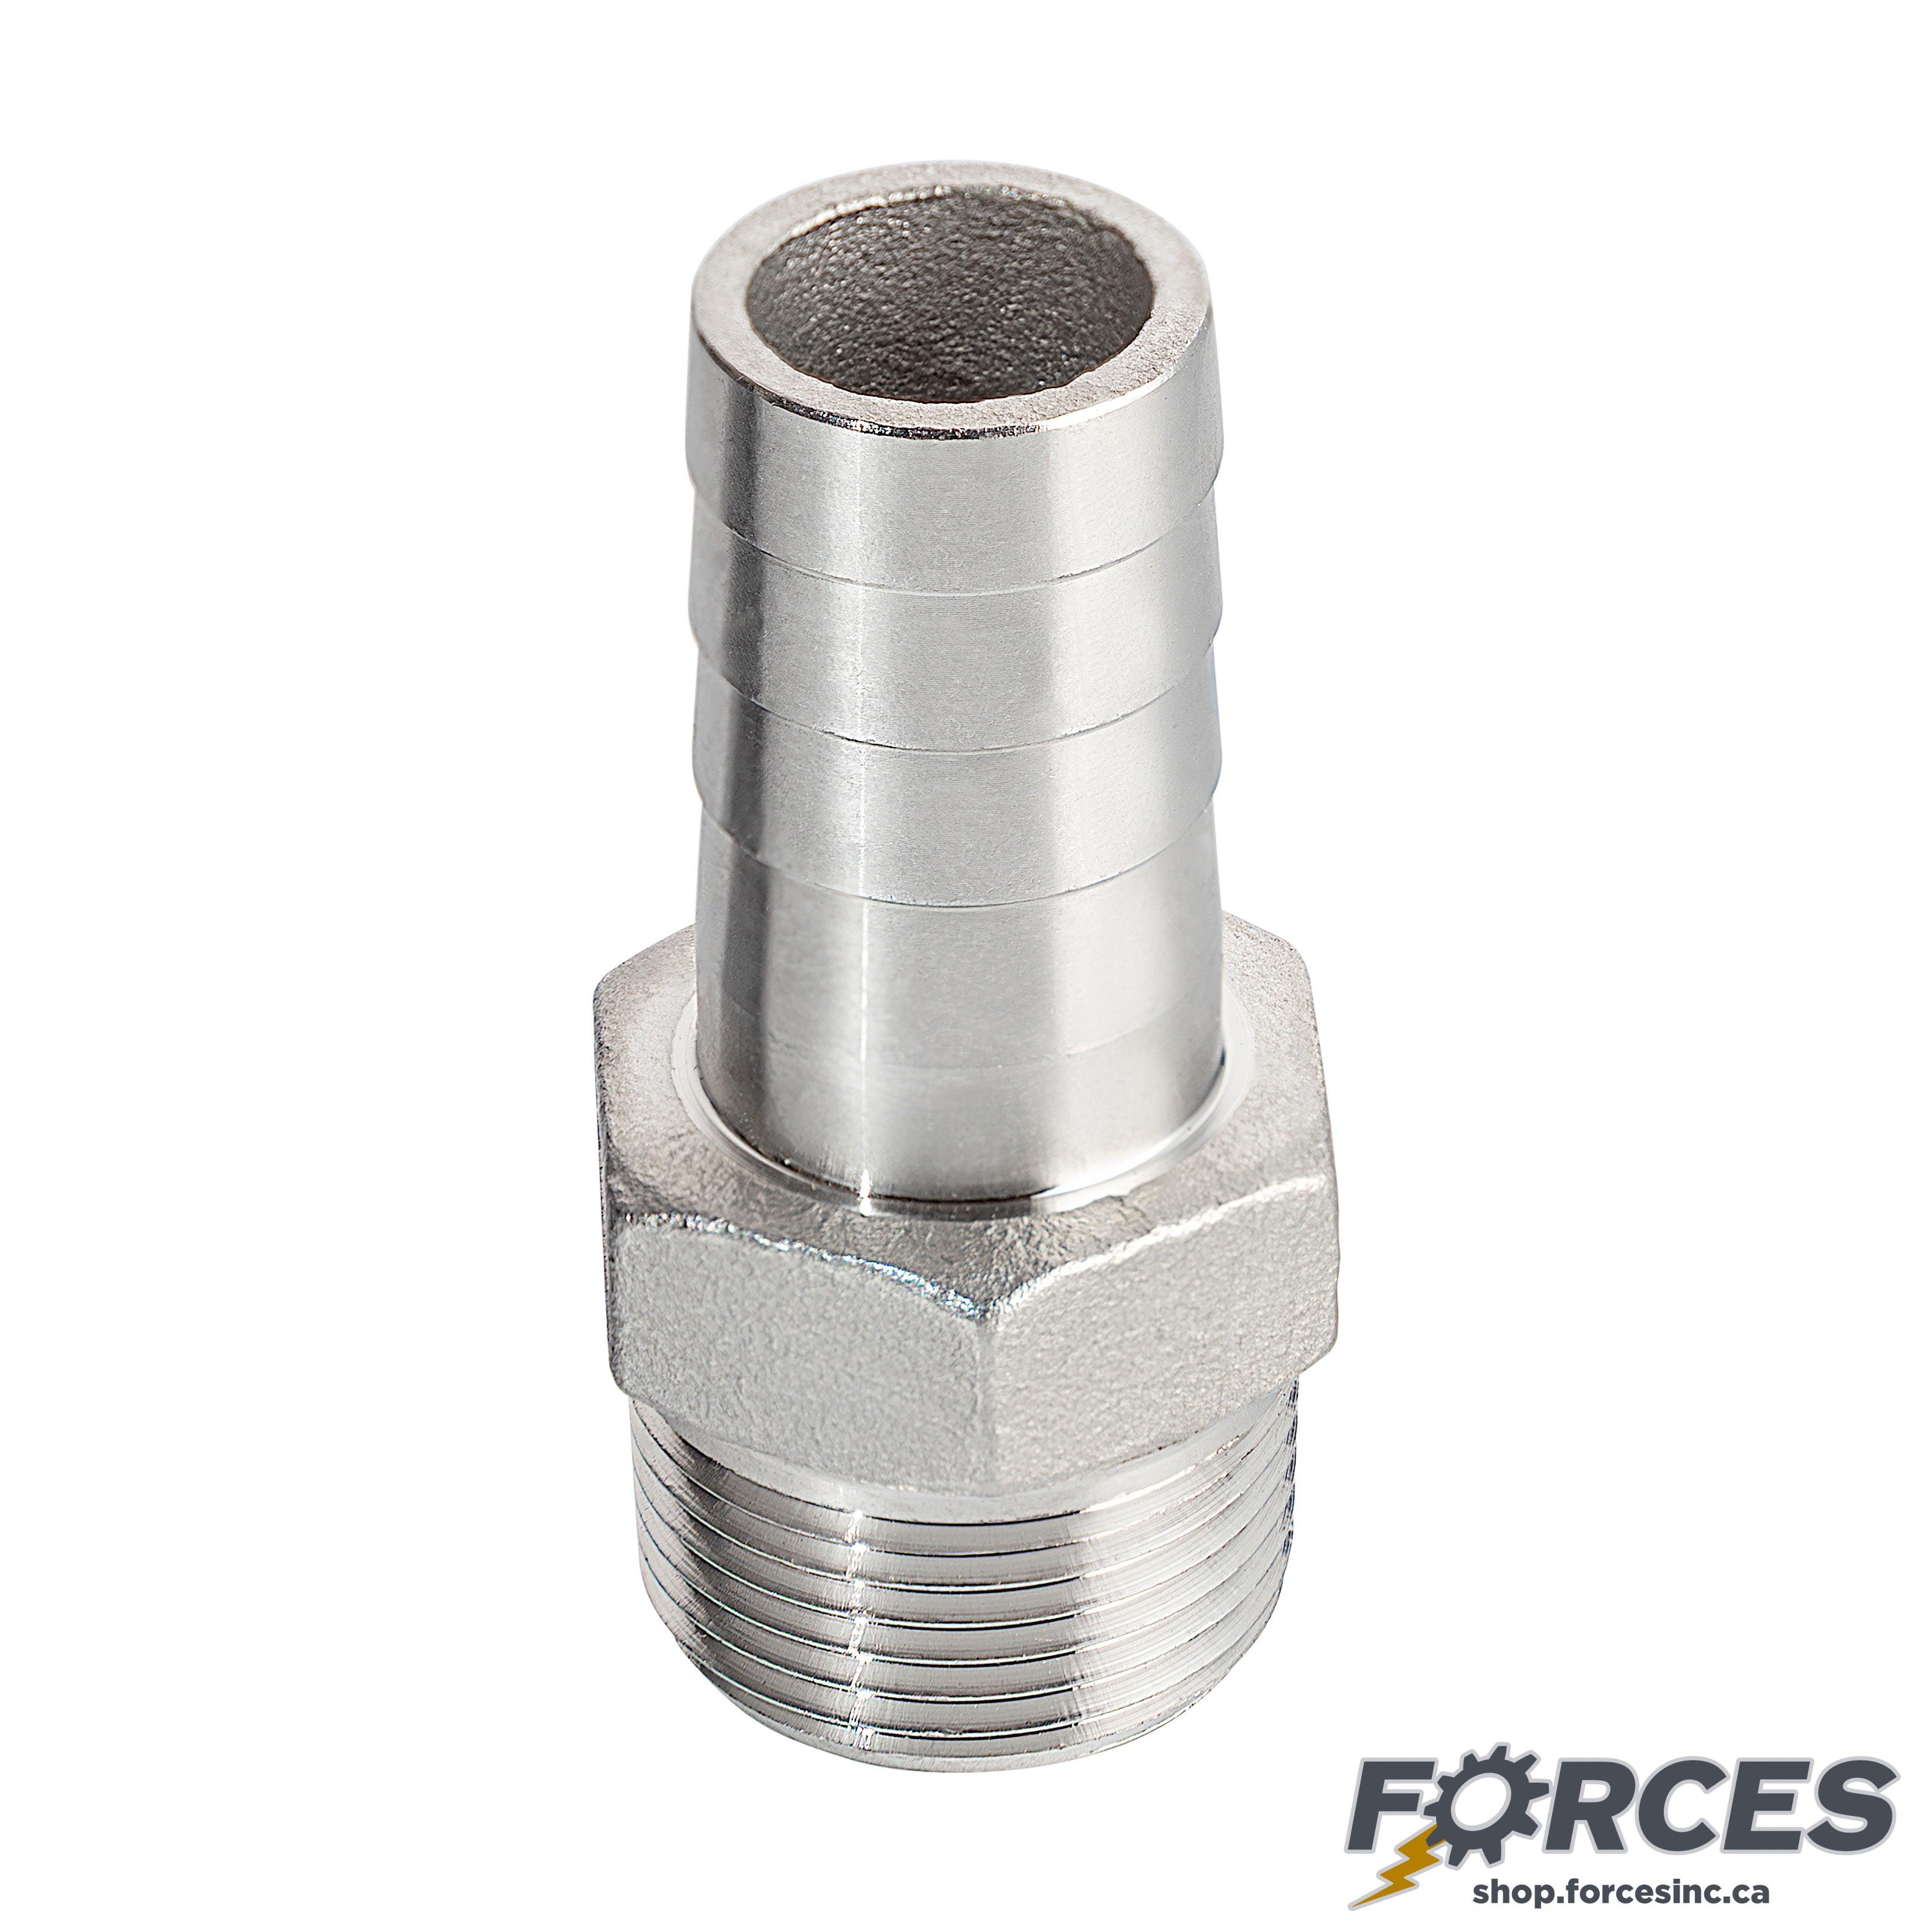 Hose Barb 1-1/4" x 1-1/4" NPT #150 - Stainless Steel 316 - Forces Inc